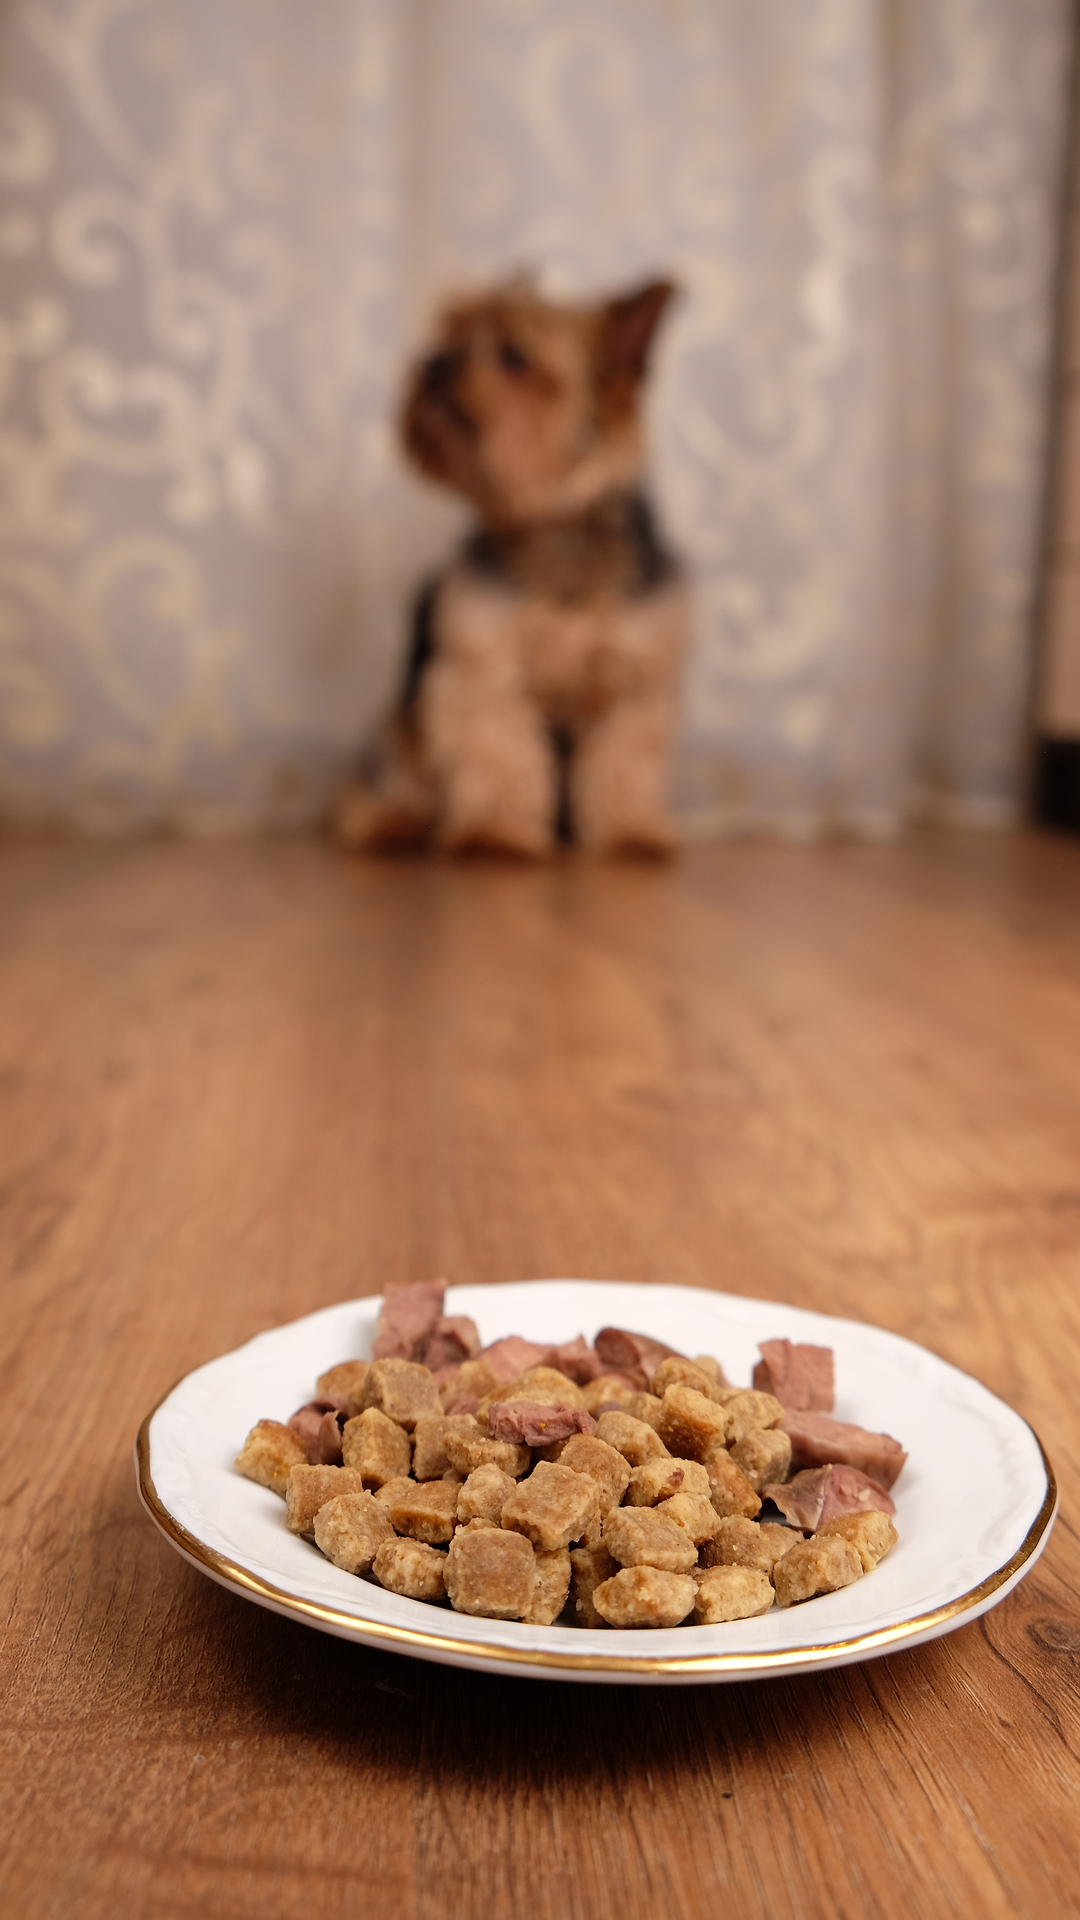 Puppy Not Eating and Why You Should Worry